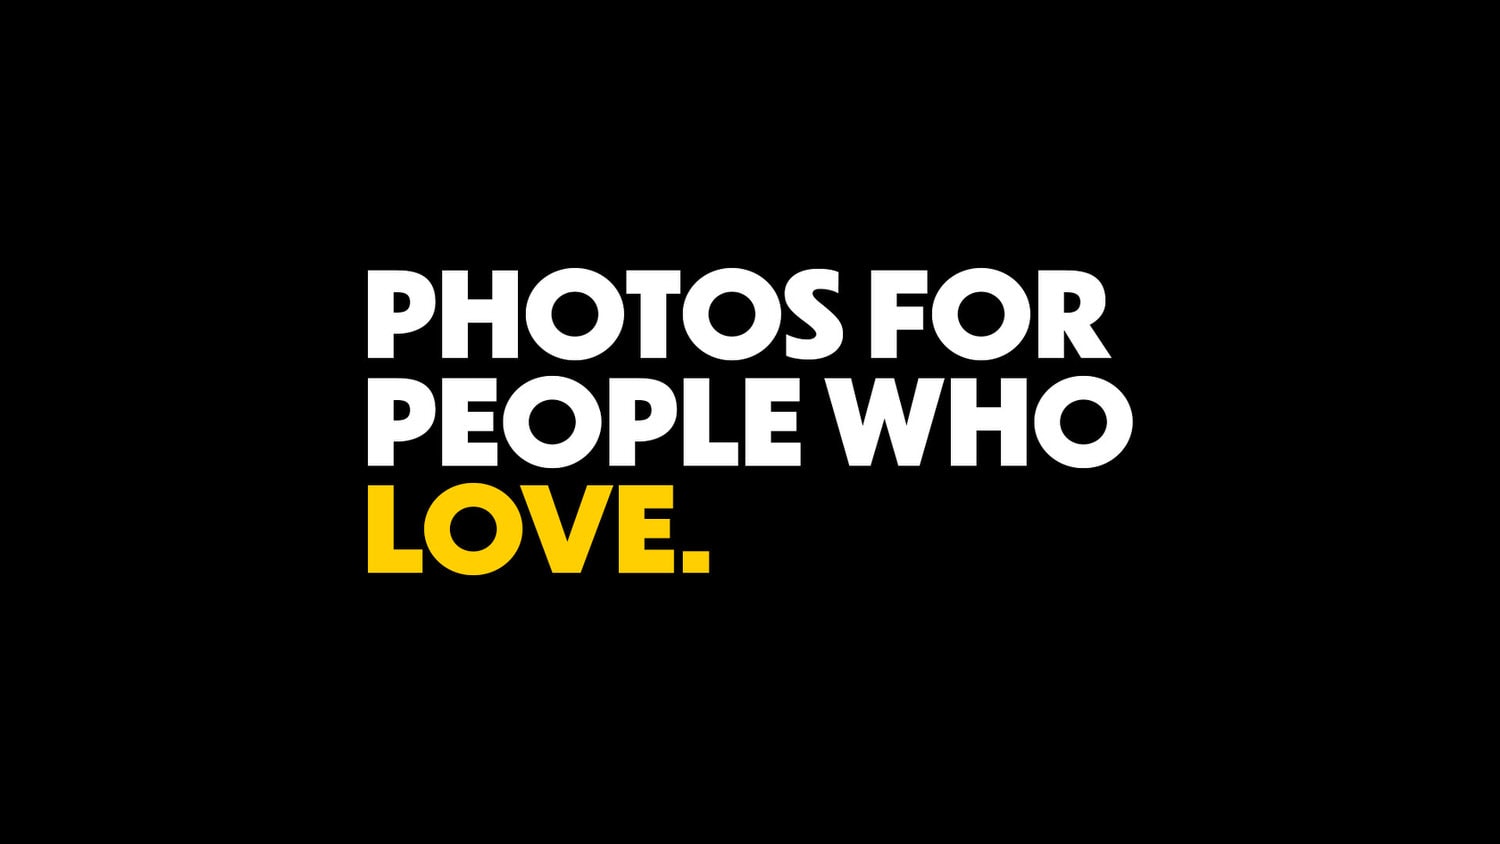 link to promo video - text reads "photos for people who love"